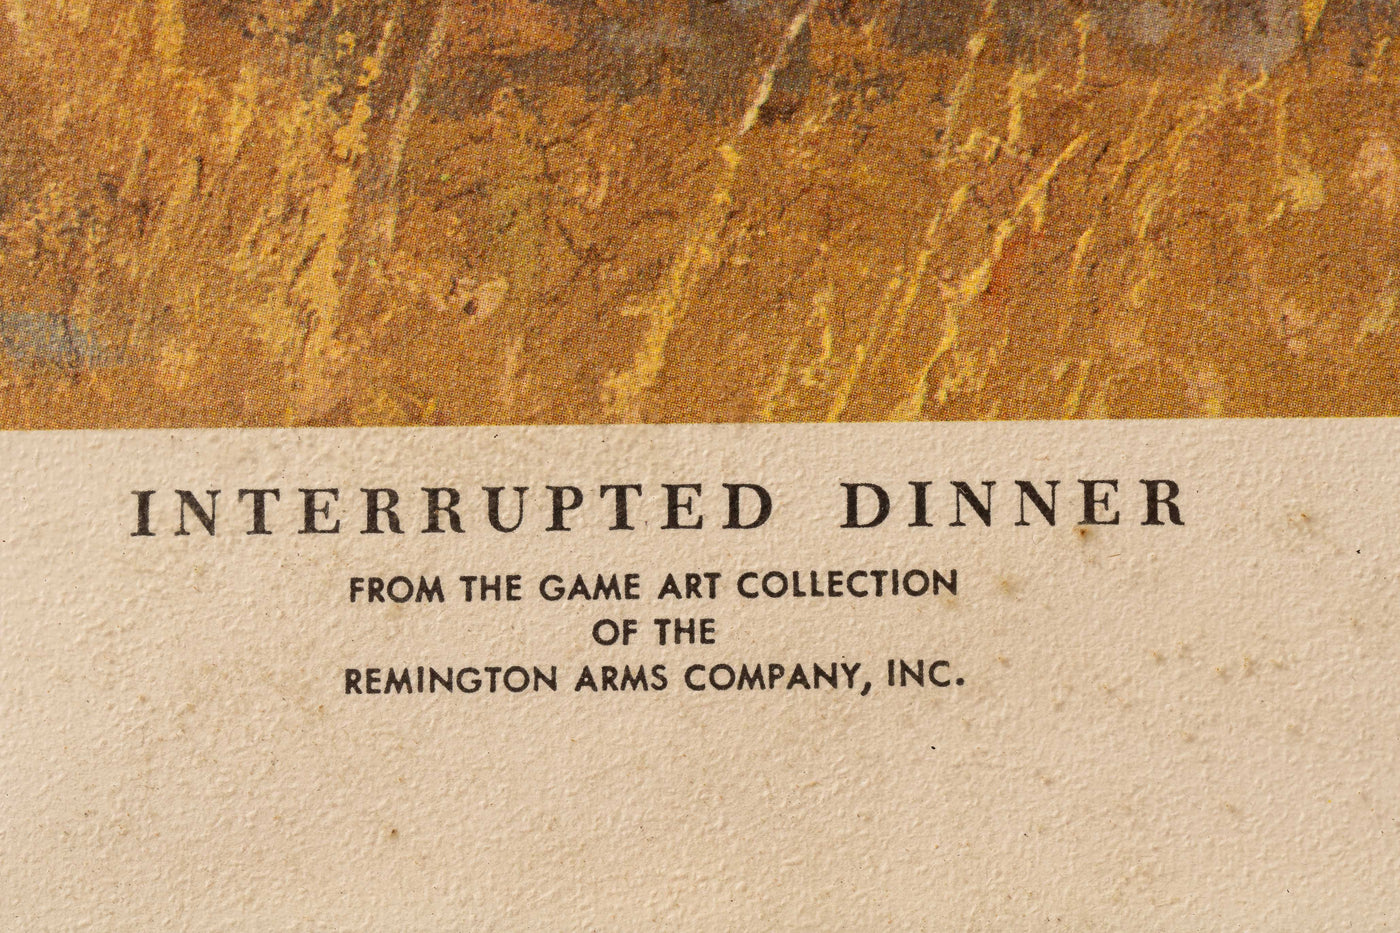 Remington Arms "Interrupted Dinner" Game Art Collection Framed Litho